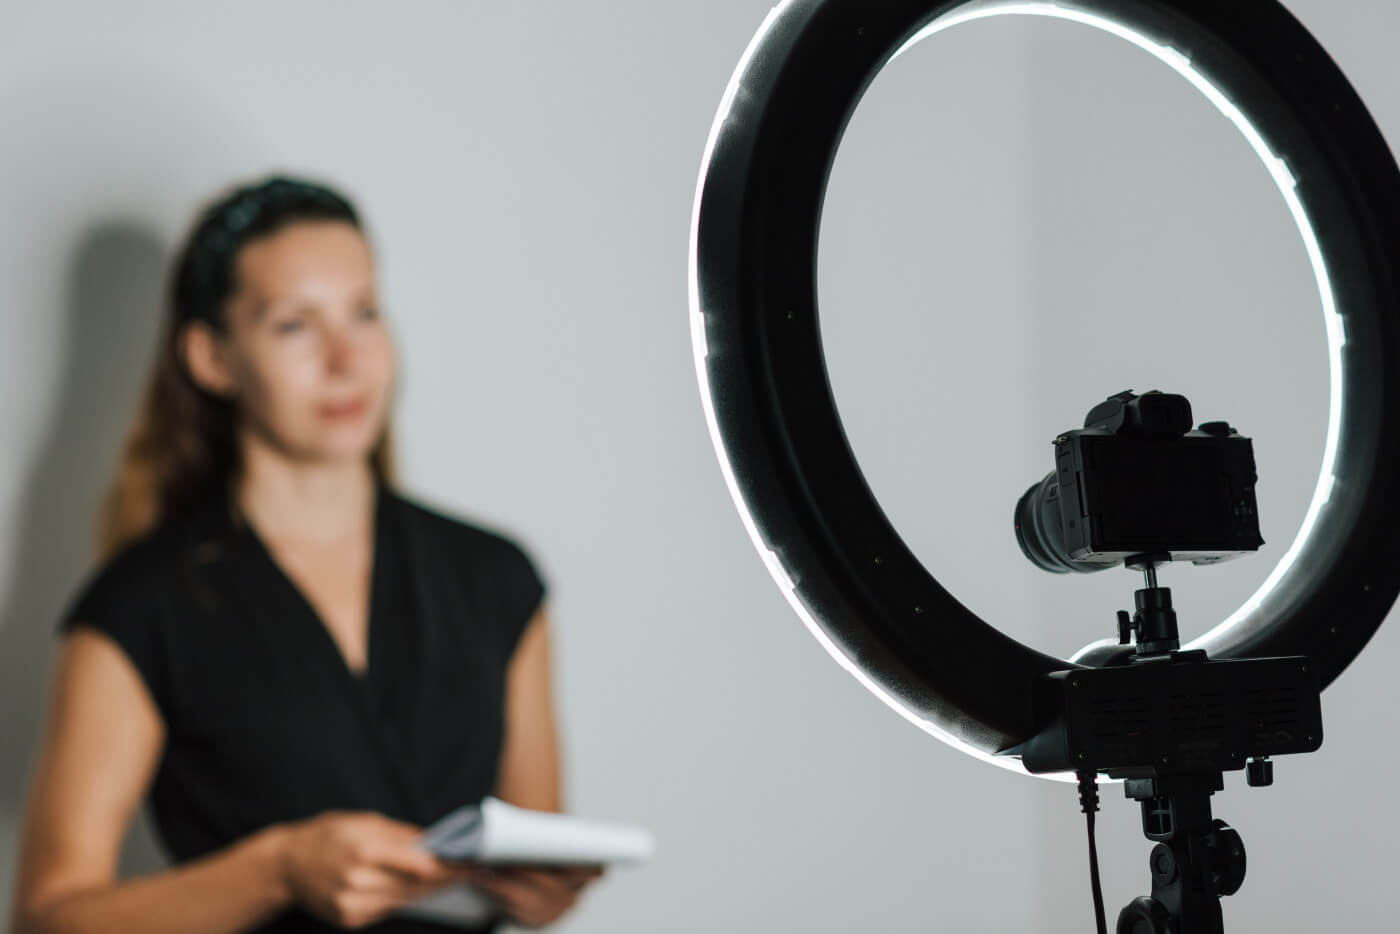 A woman recording a video of herself with a camera and ring light.